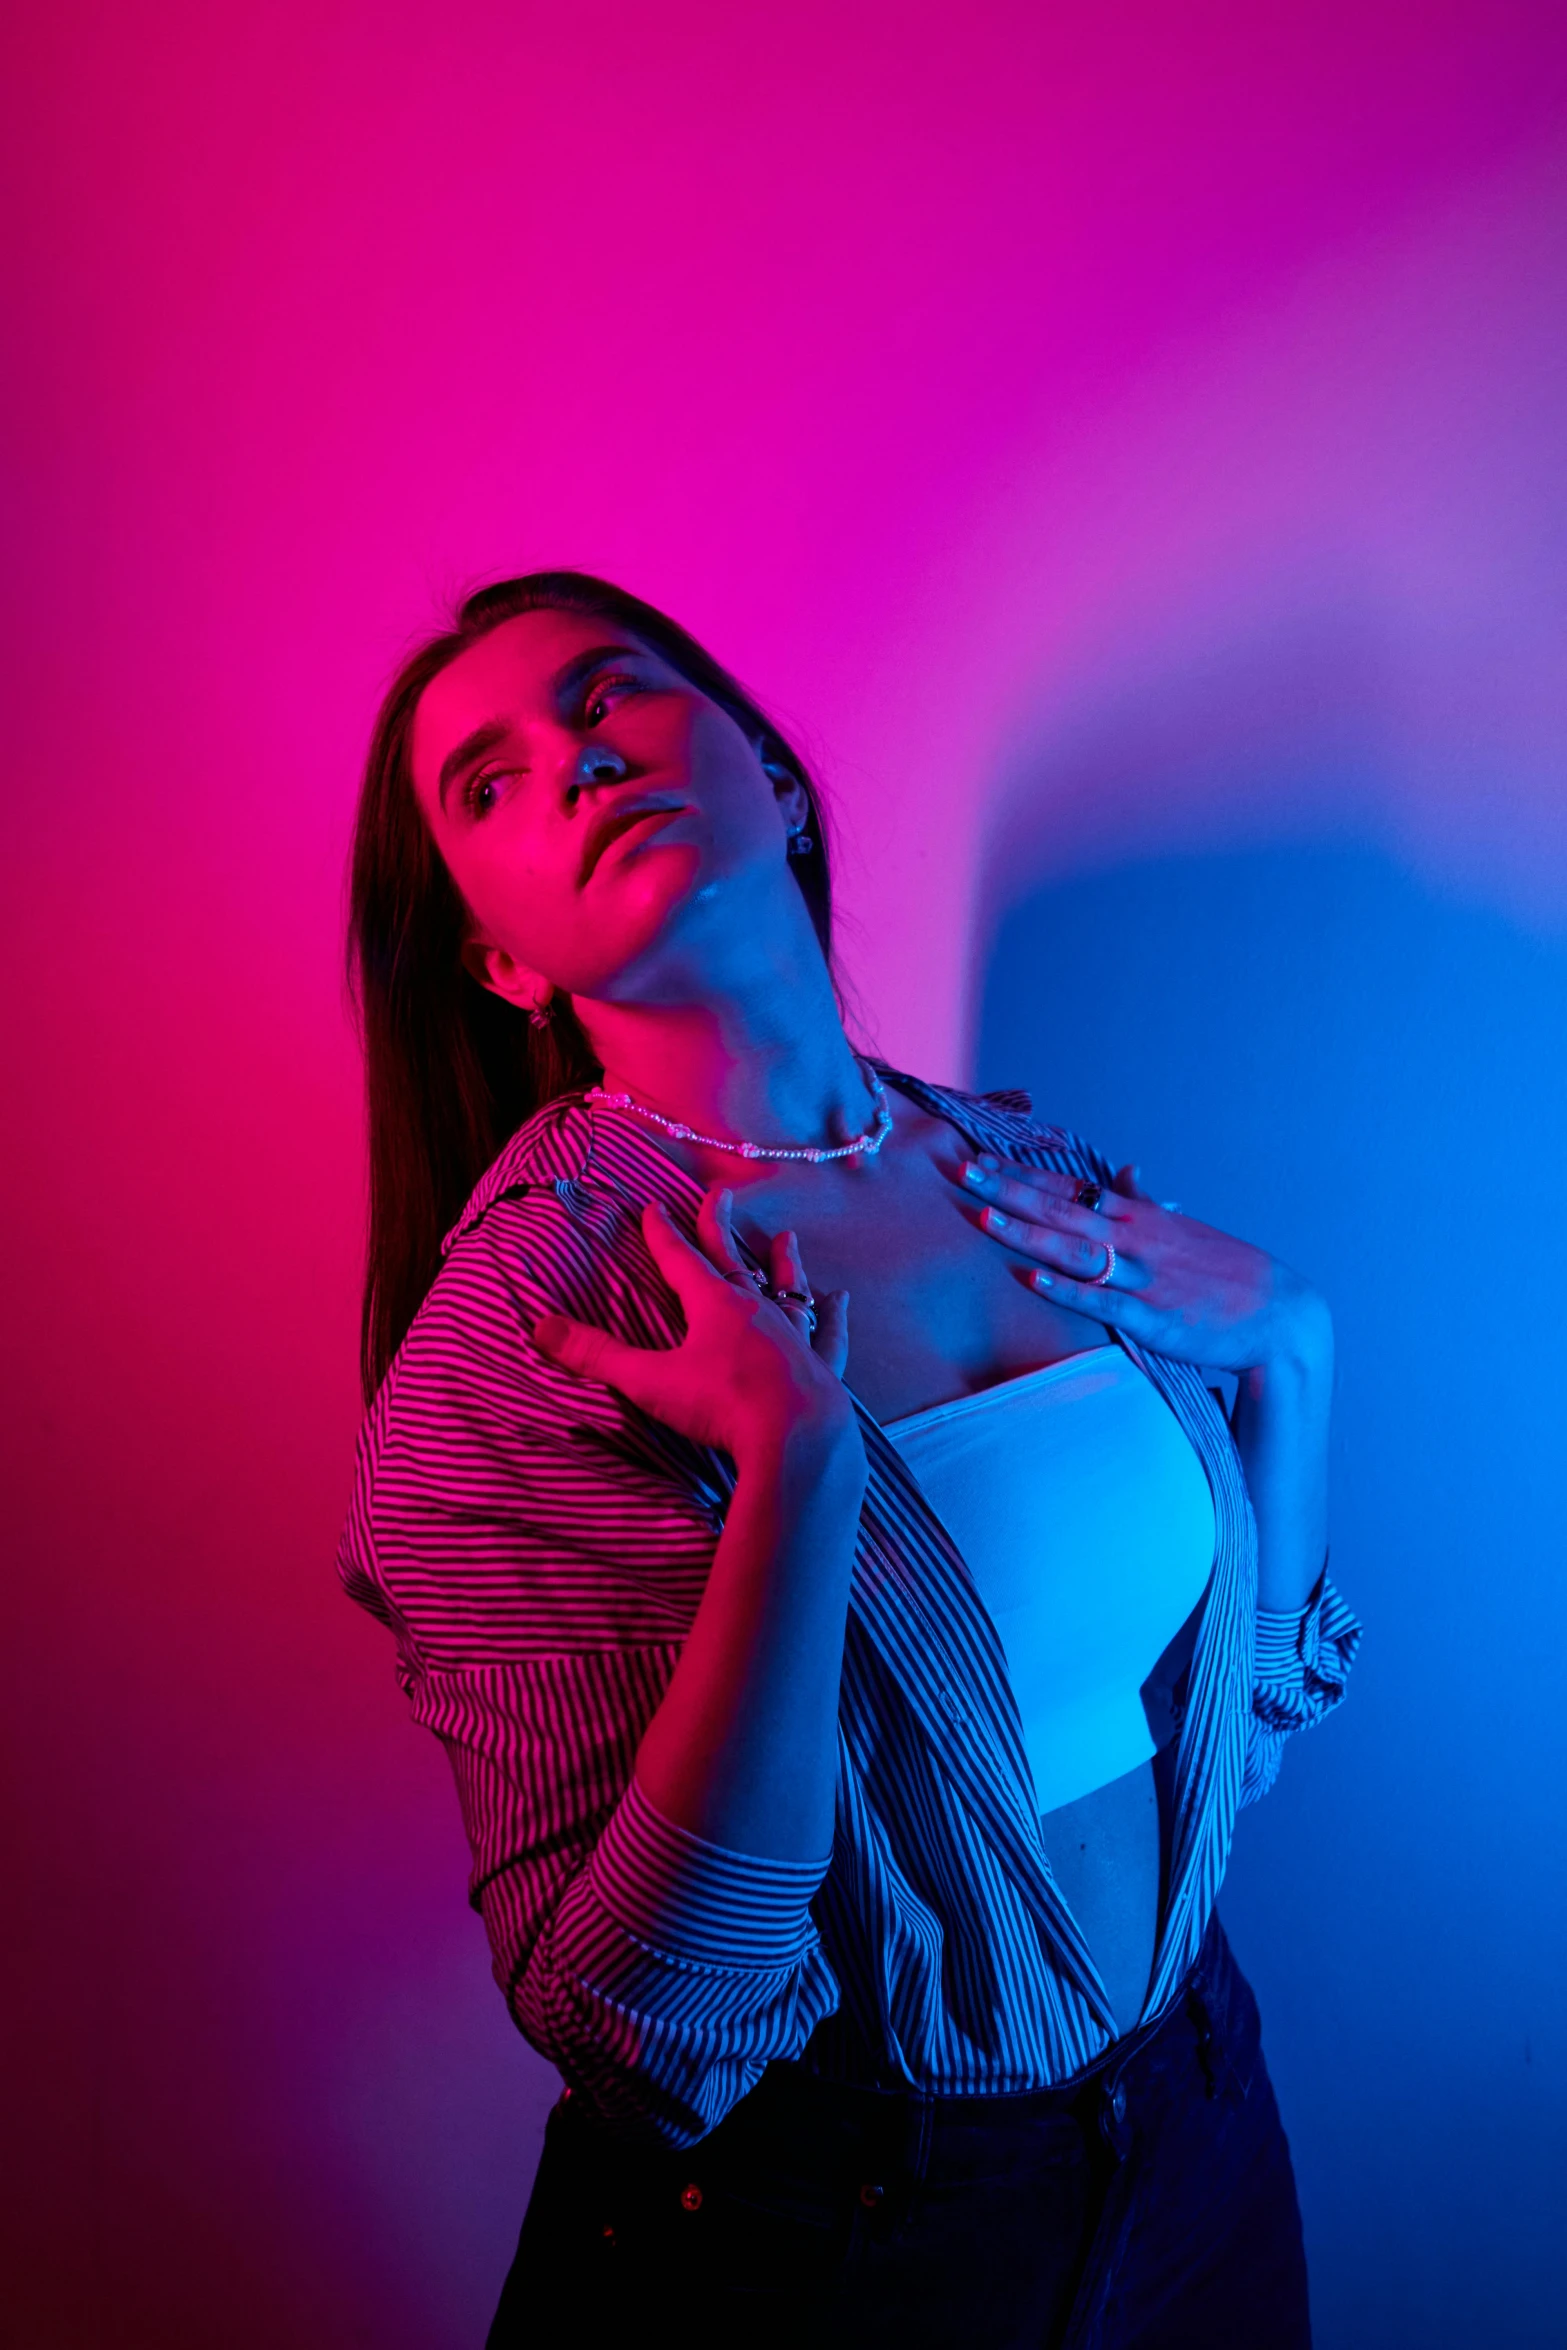 a woman standing in front of a pink and blue background, an album cover, inspired by Elsa Bleda, unsplash, blue and red lights, model shoot, 5 0 0 px models, bisexual lighting